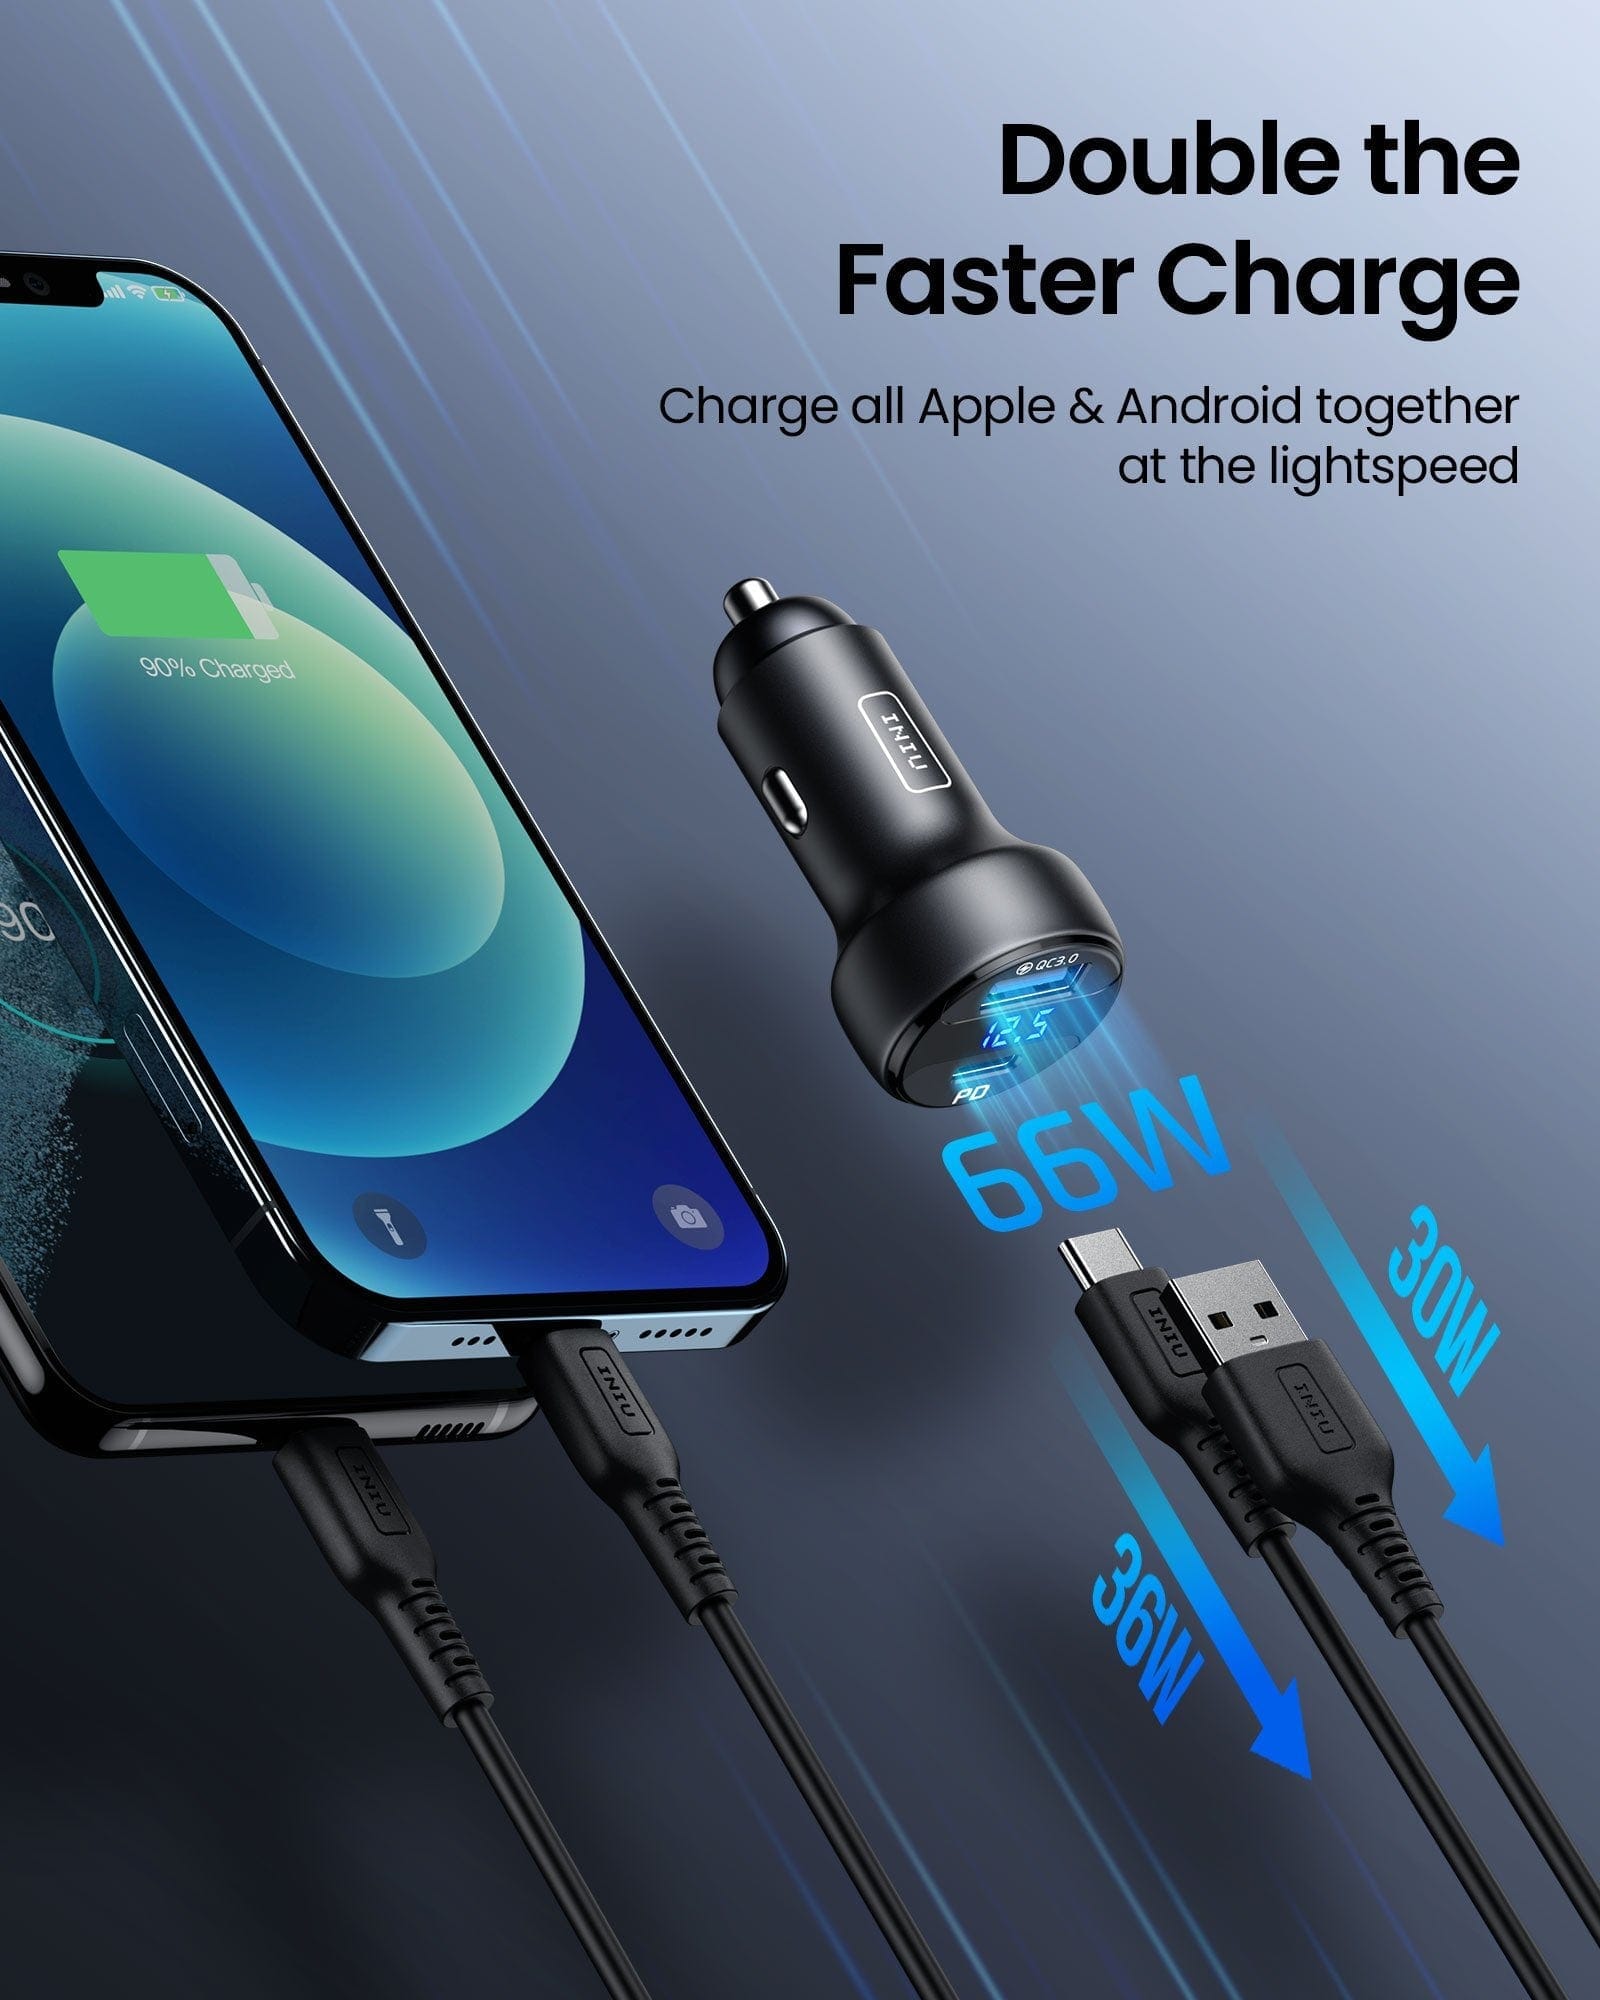 Double the Faster Charge